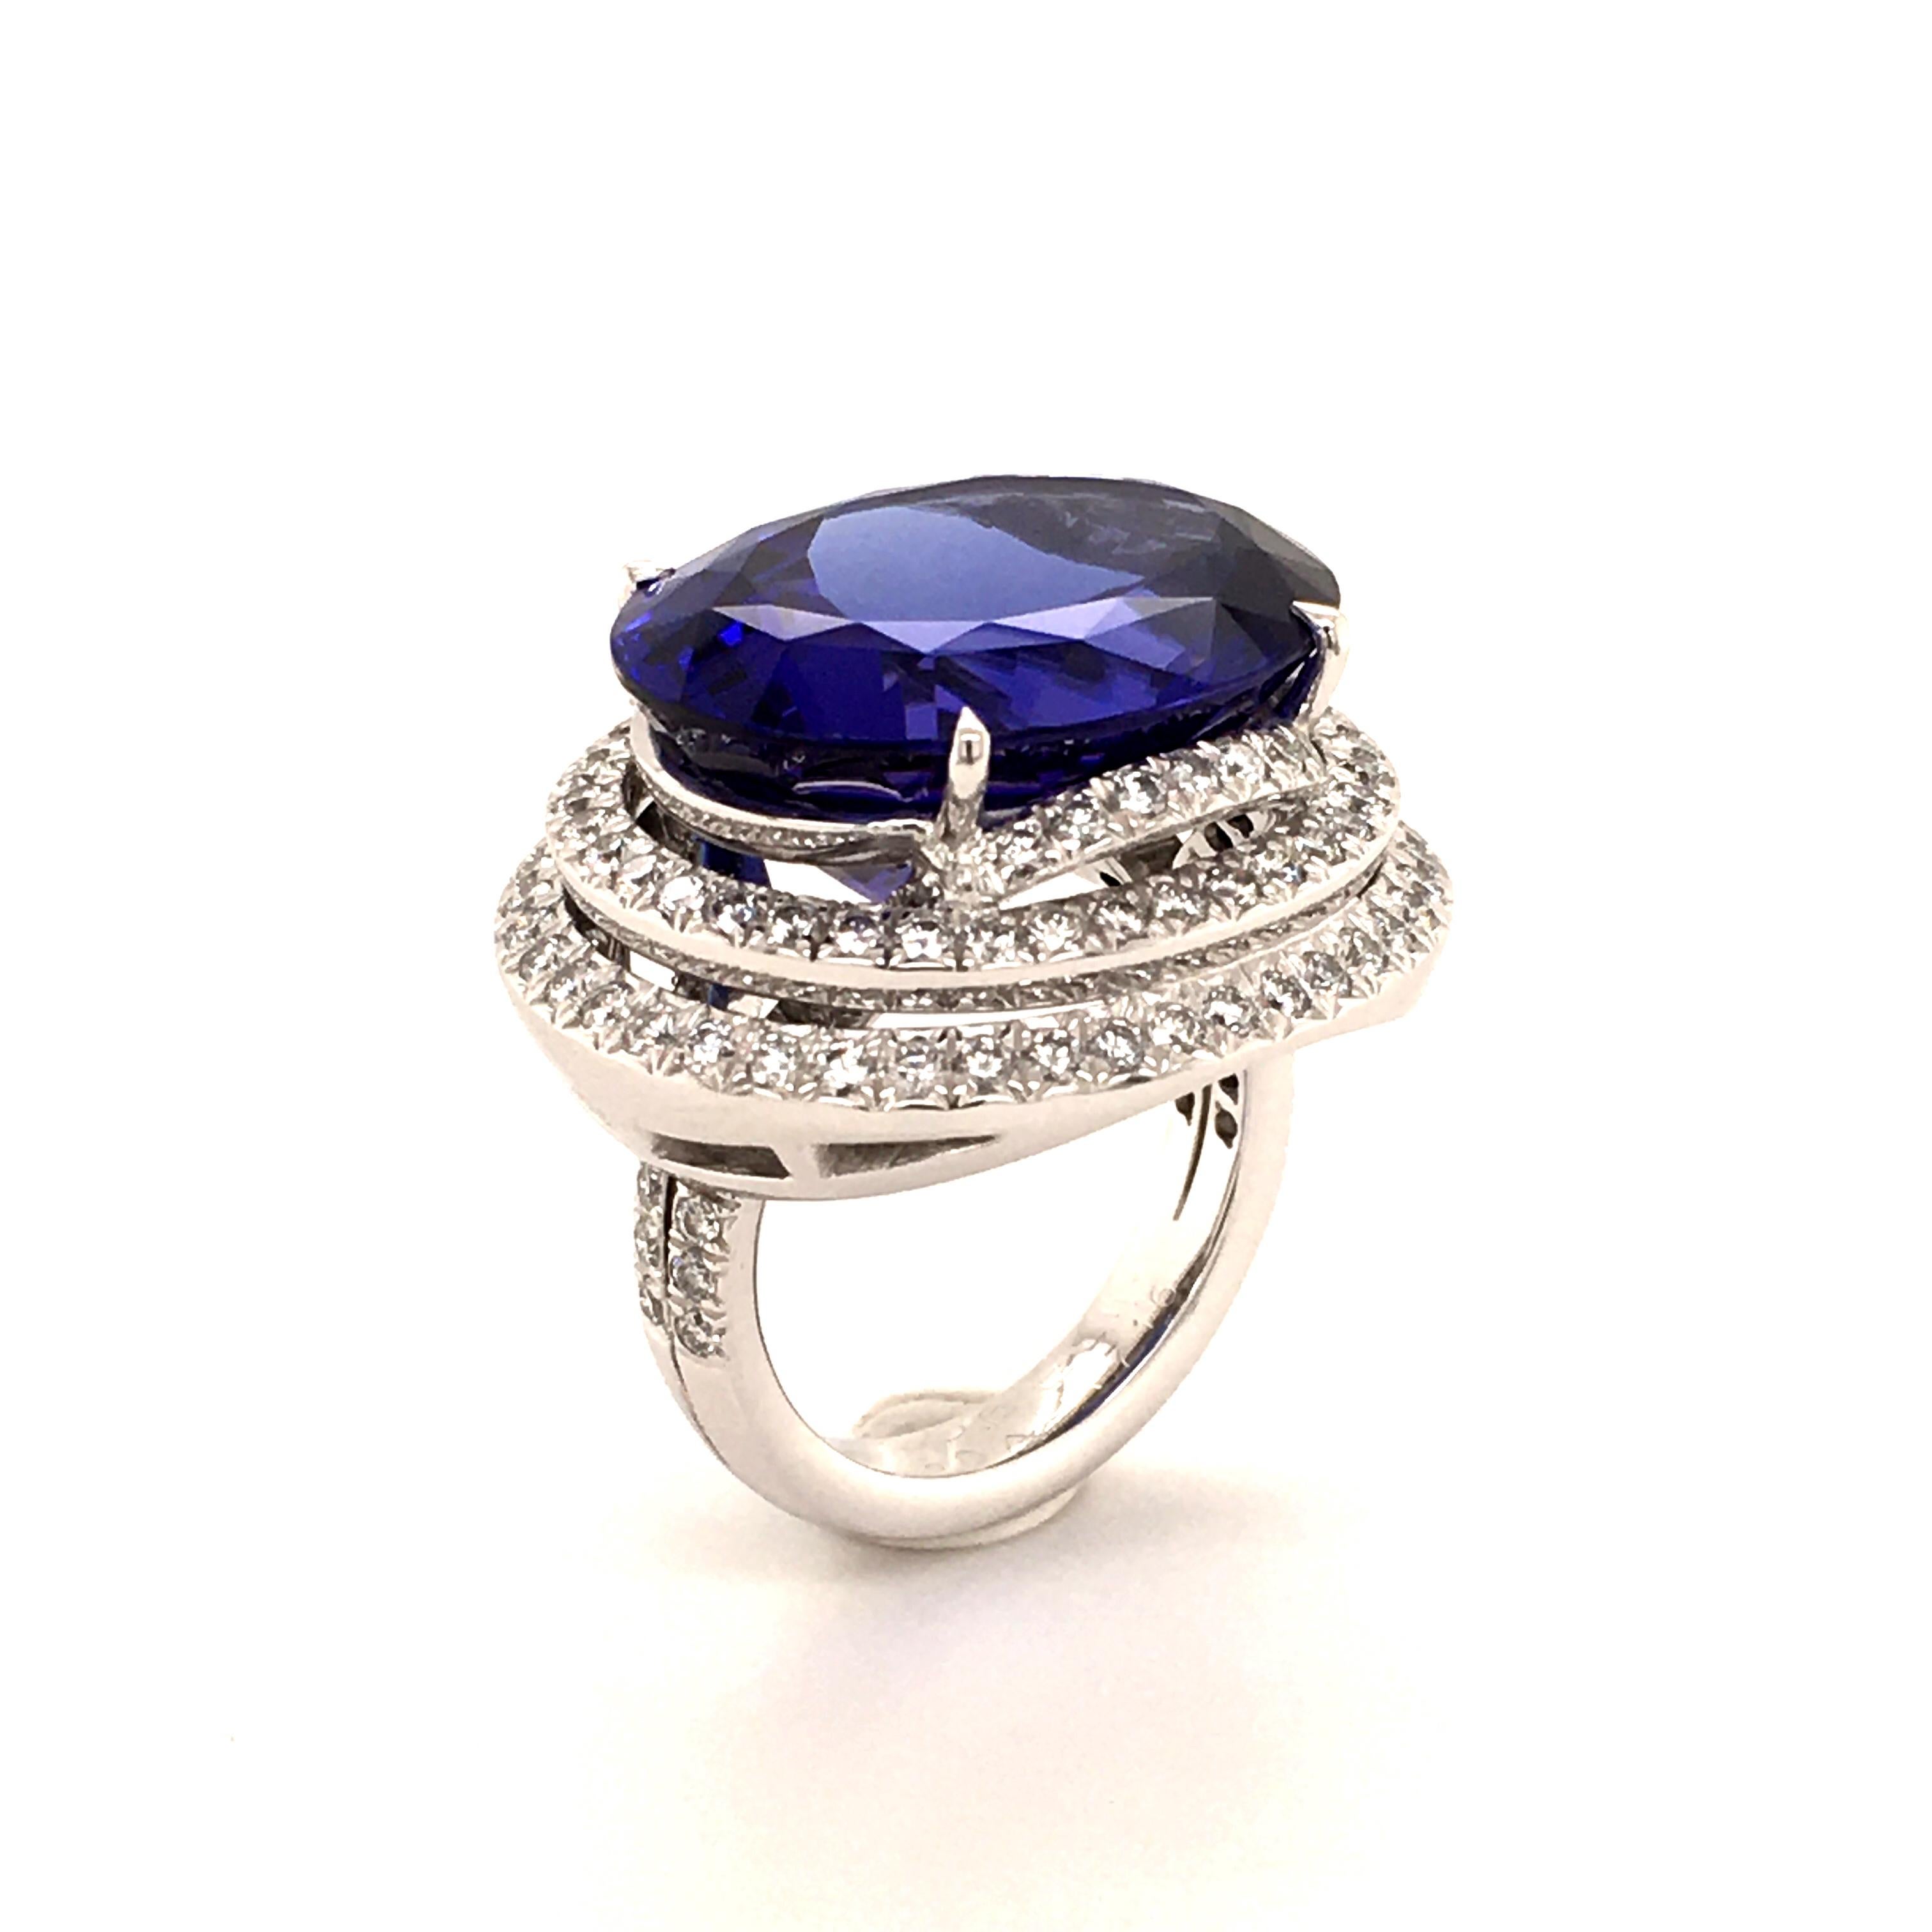 Contemporary Spectacular 23.39 Carat Tanzanite and Diamond Ring in White Gold 18 Karat For Sale